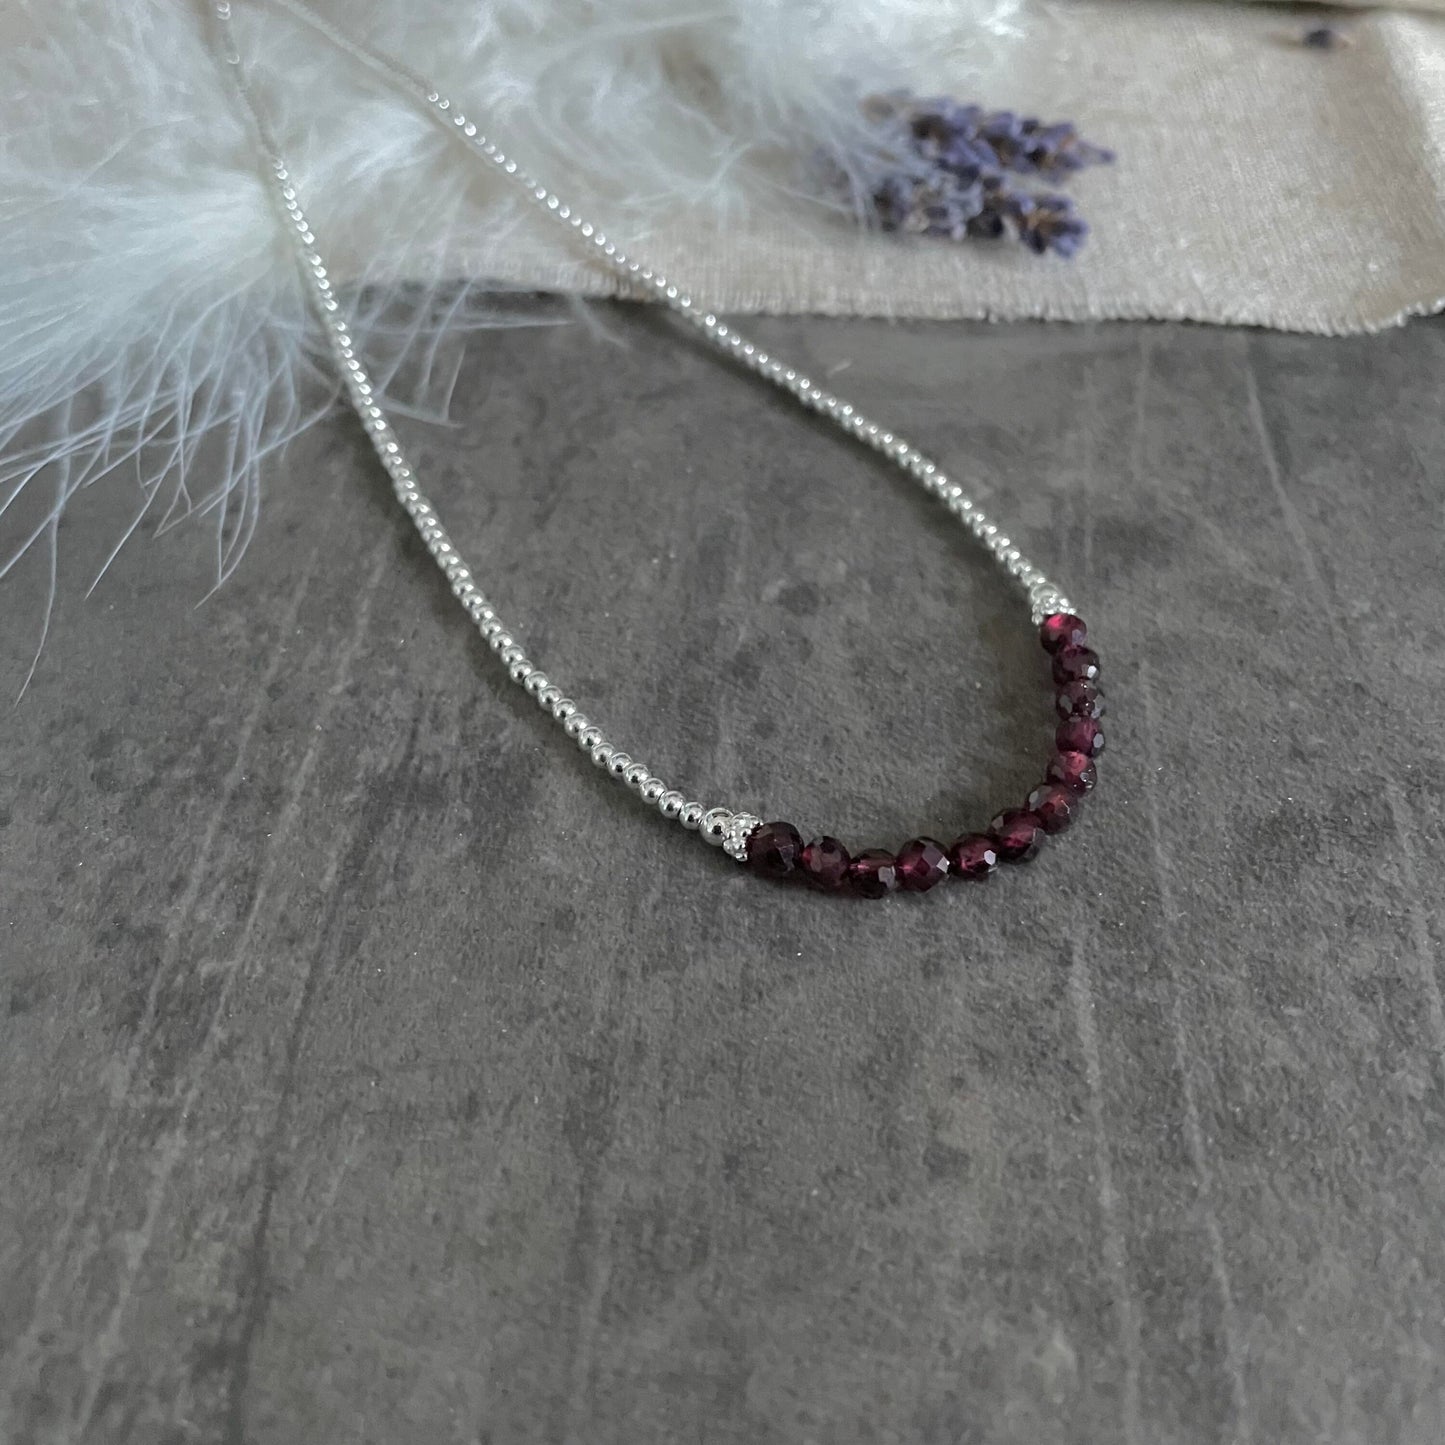 Thin Garnet and Sterling Silver Bead Necklace, dainty necklace